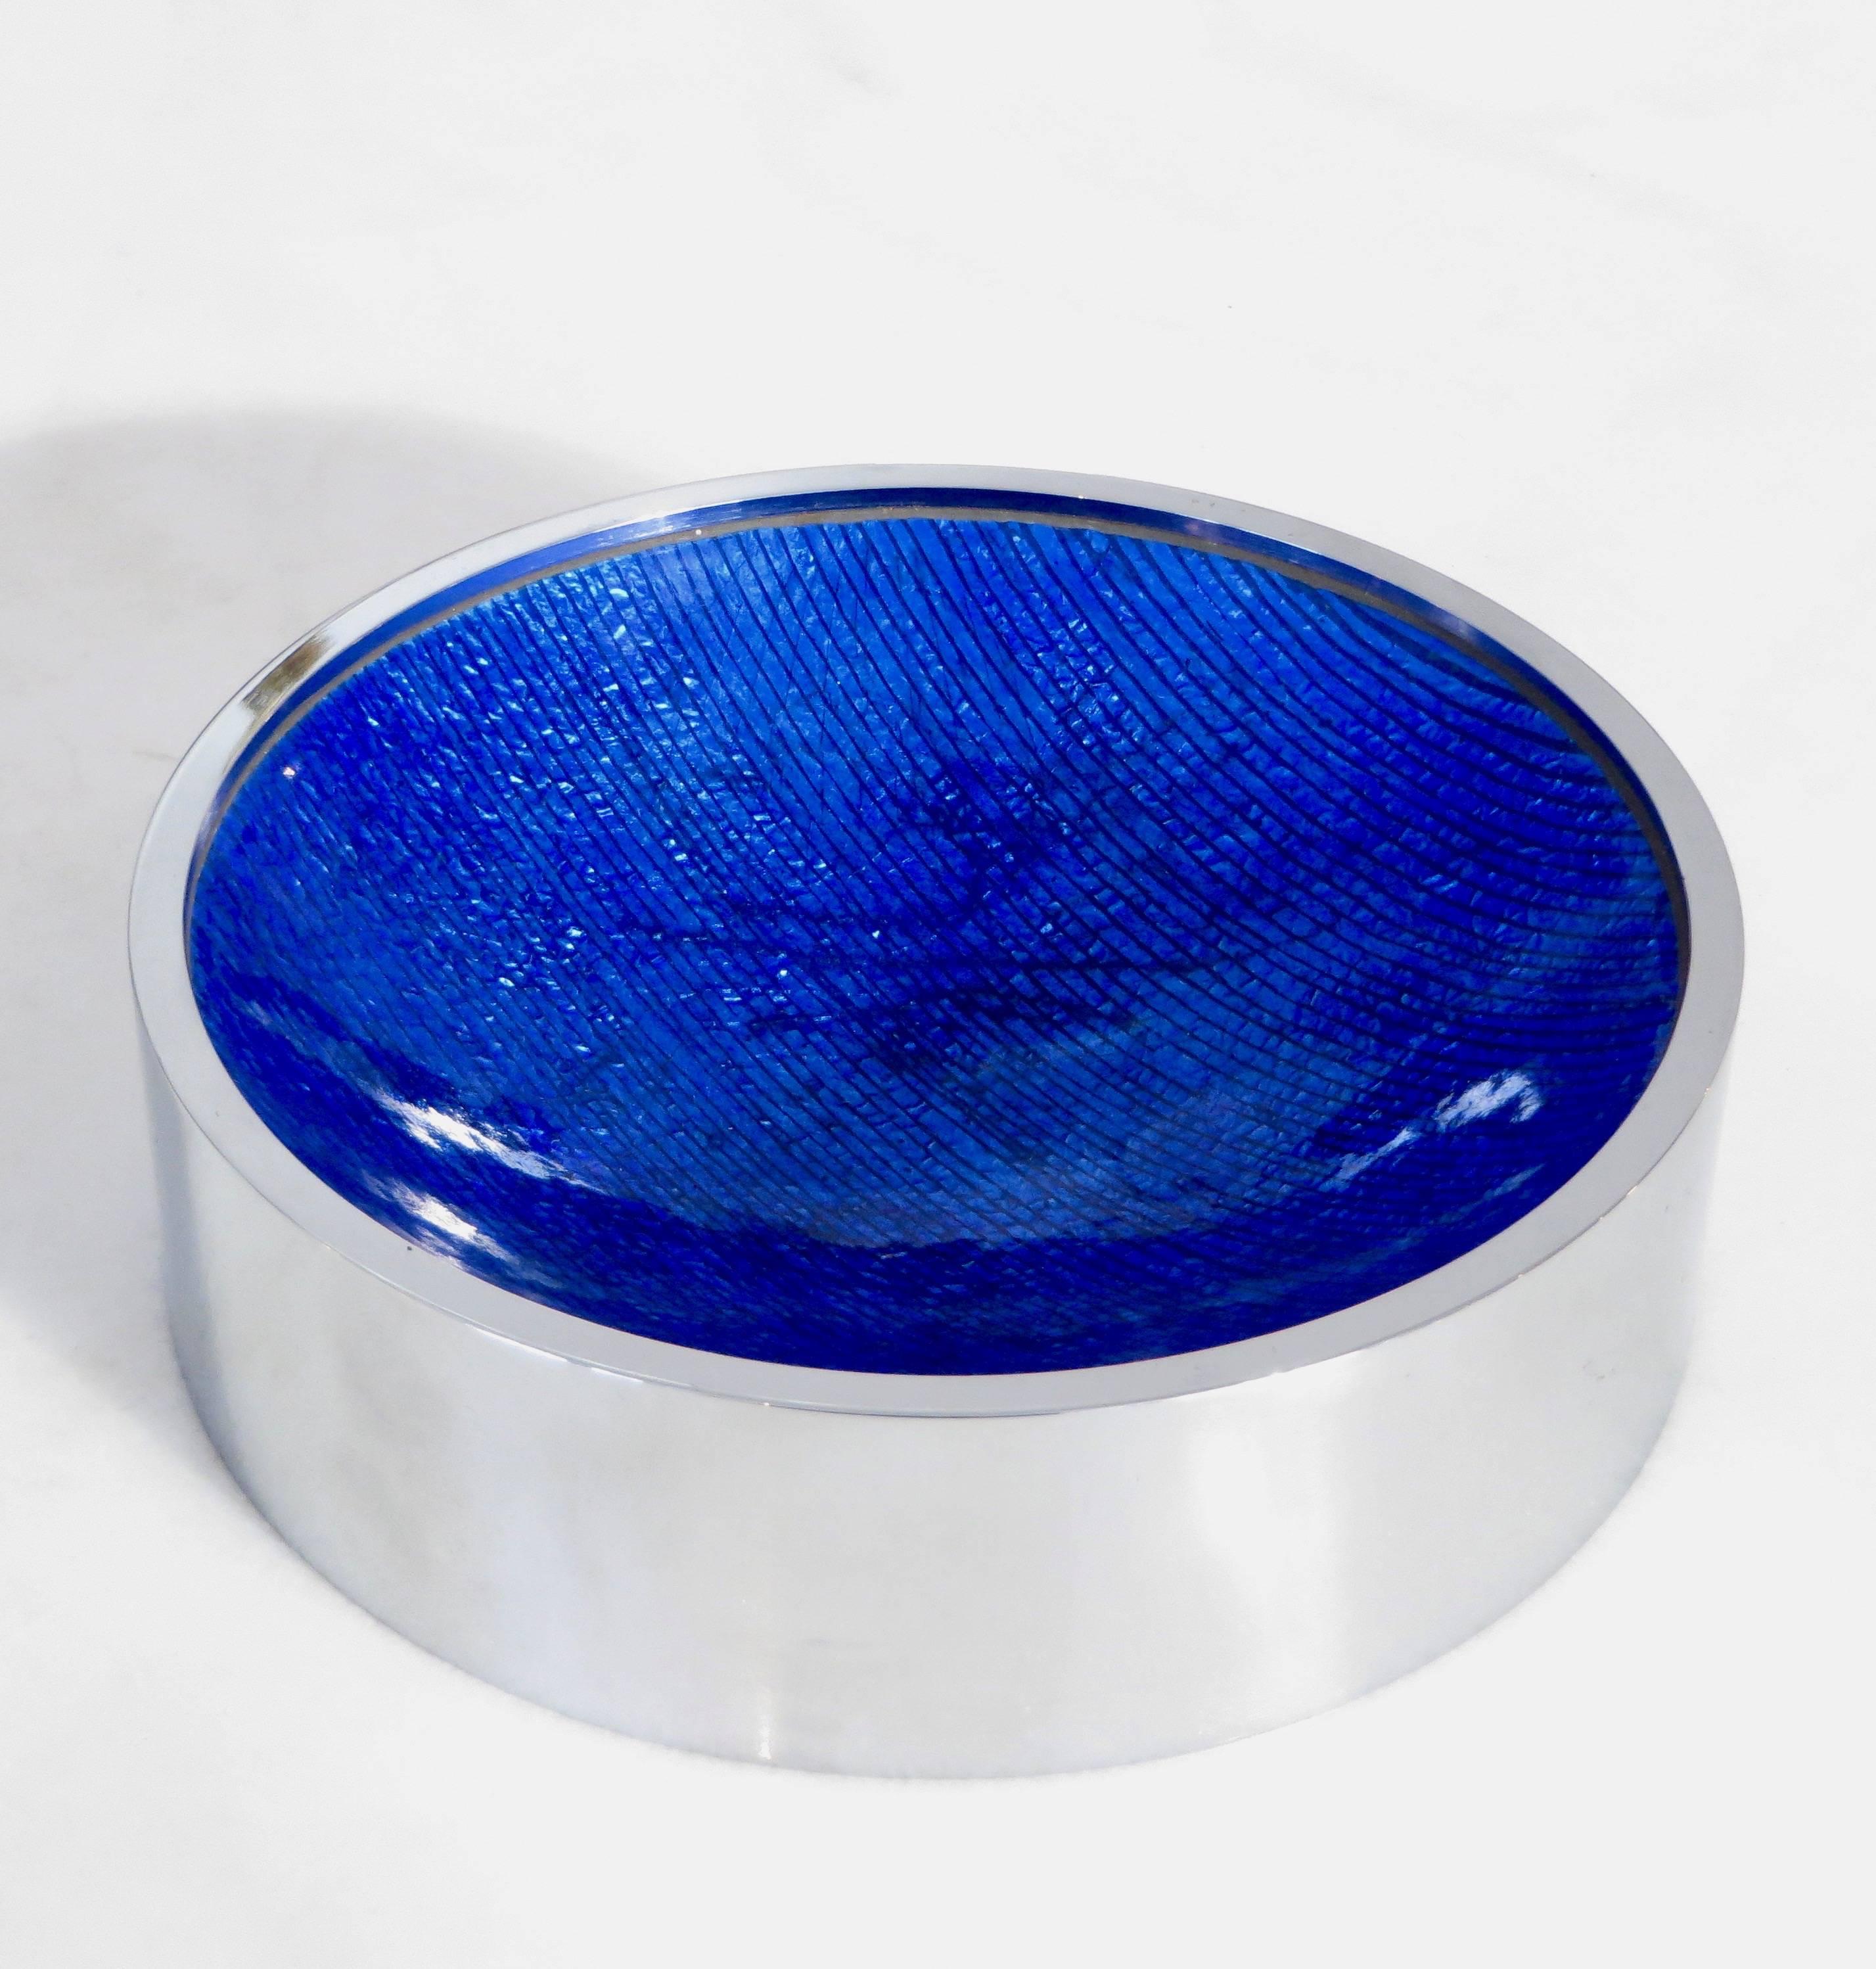 Italian Del Campo blue enameled vide poche or dish or candy dish with a nickel chrome frame.
A deep blue with subtle lines of black enamel dish in perfect condition.
A fine desk accessory.
 